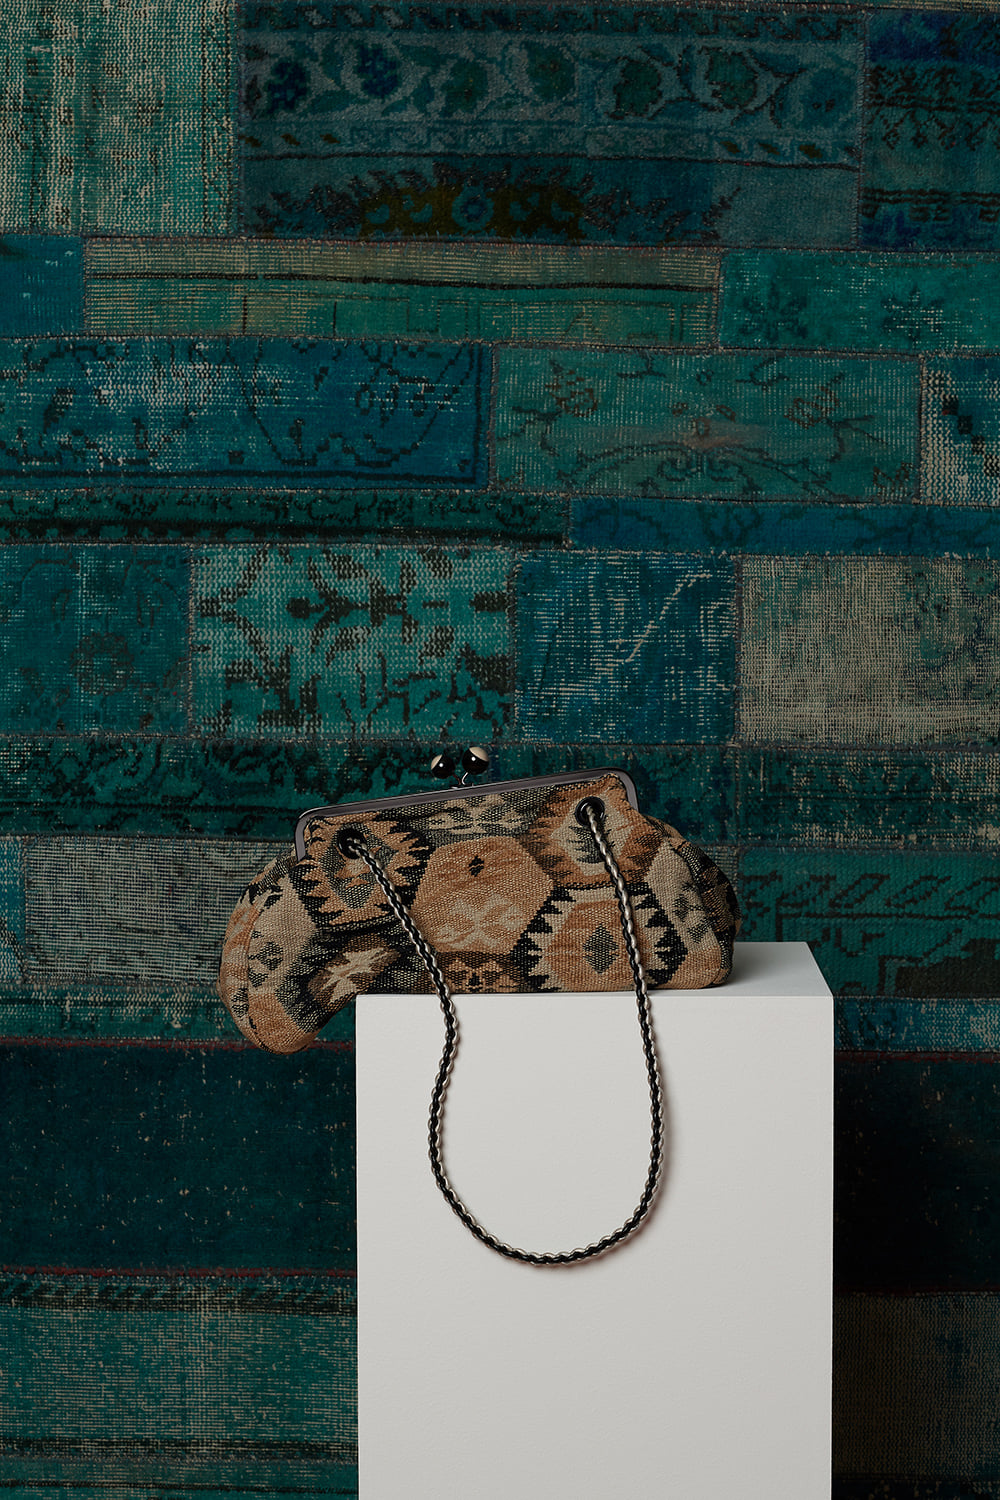 Furnished in rich tapestry, the new Pasticcino Bag is a work of art. find it in-store and online